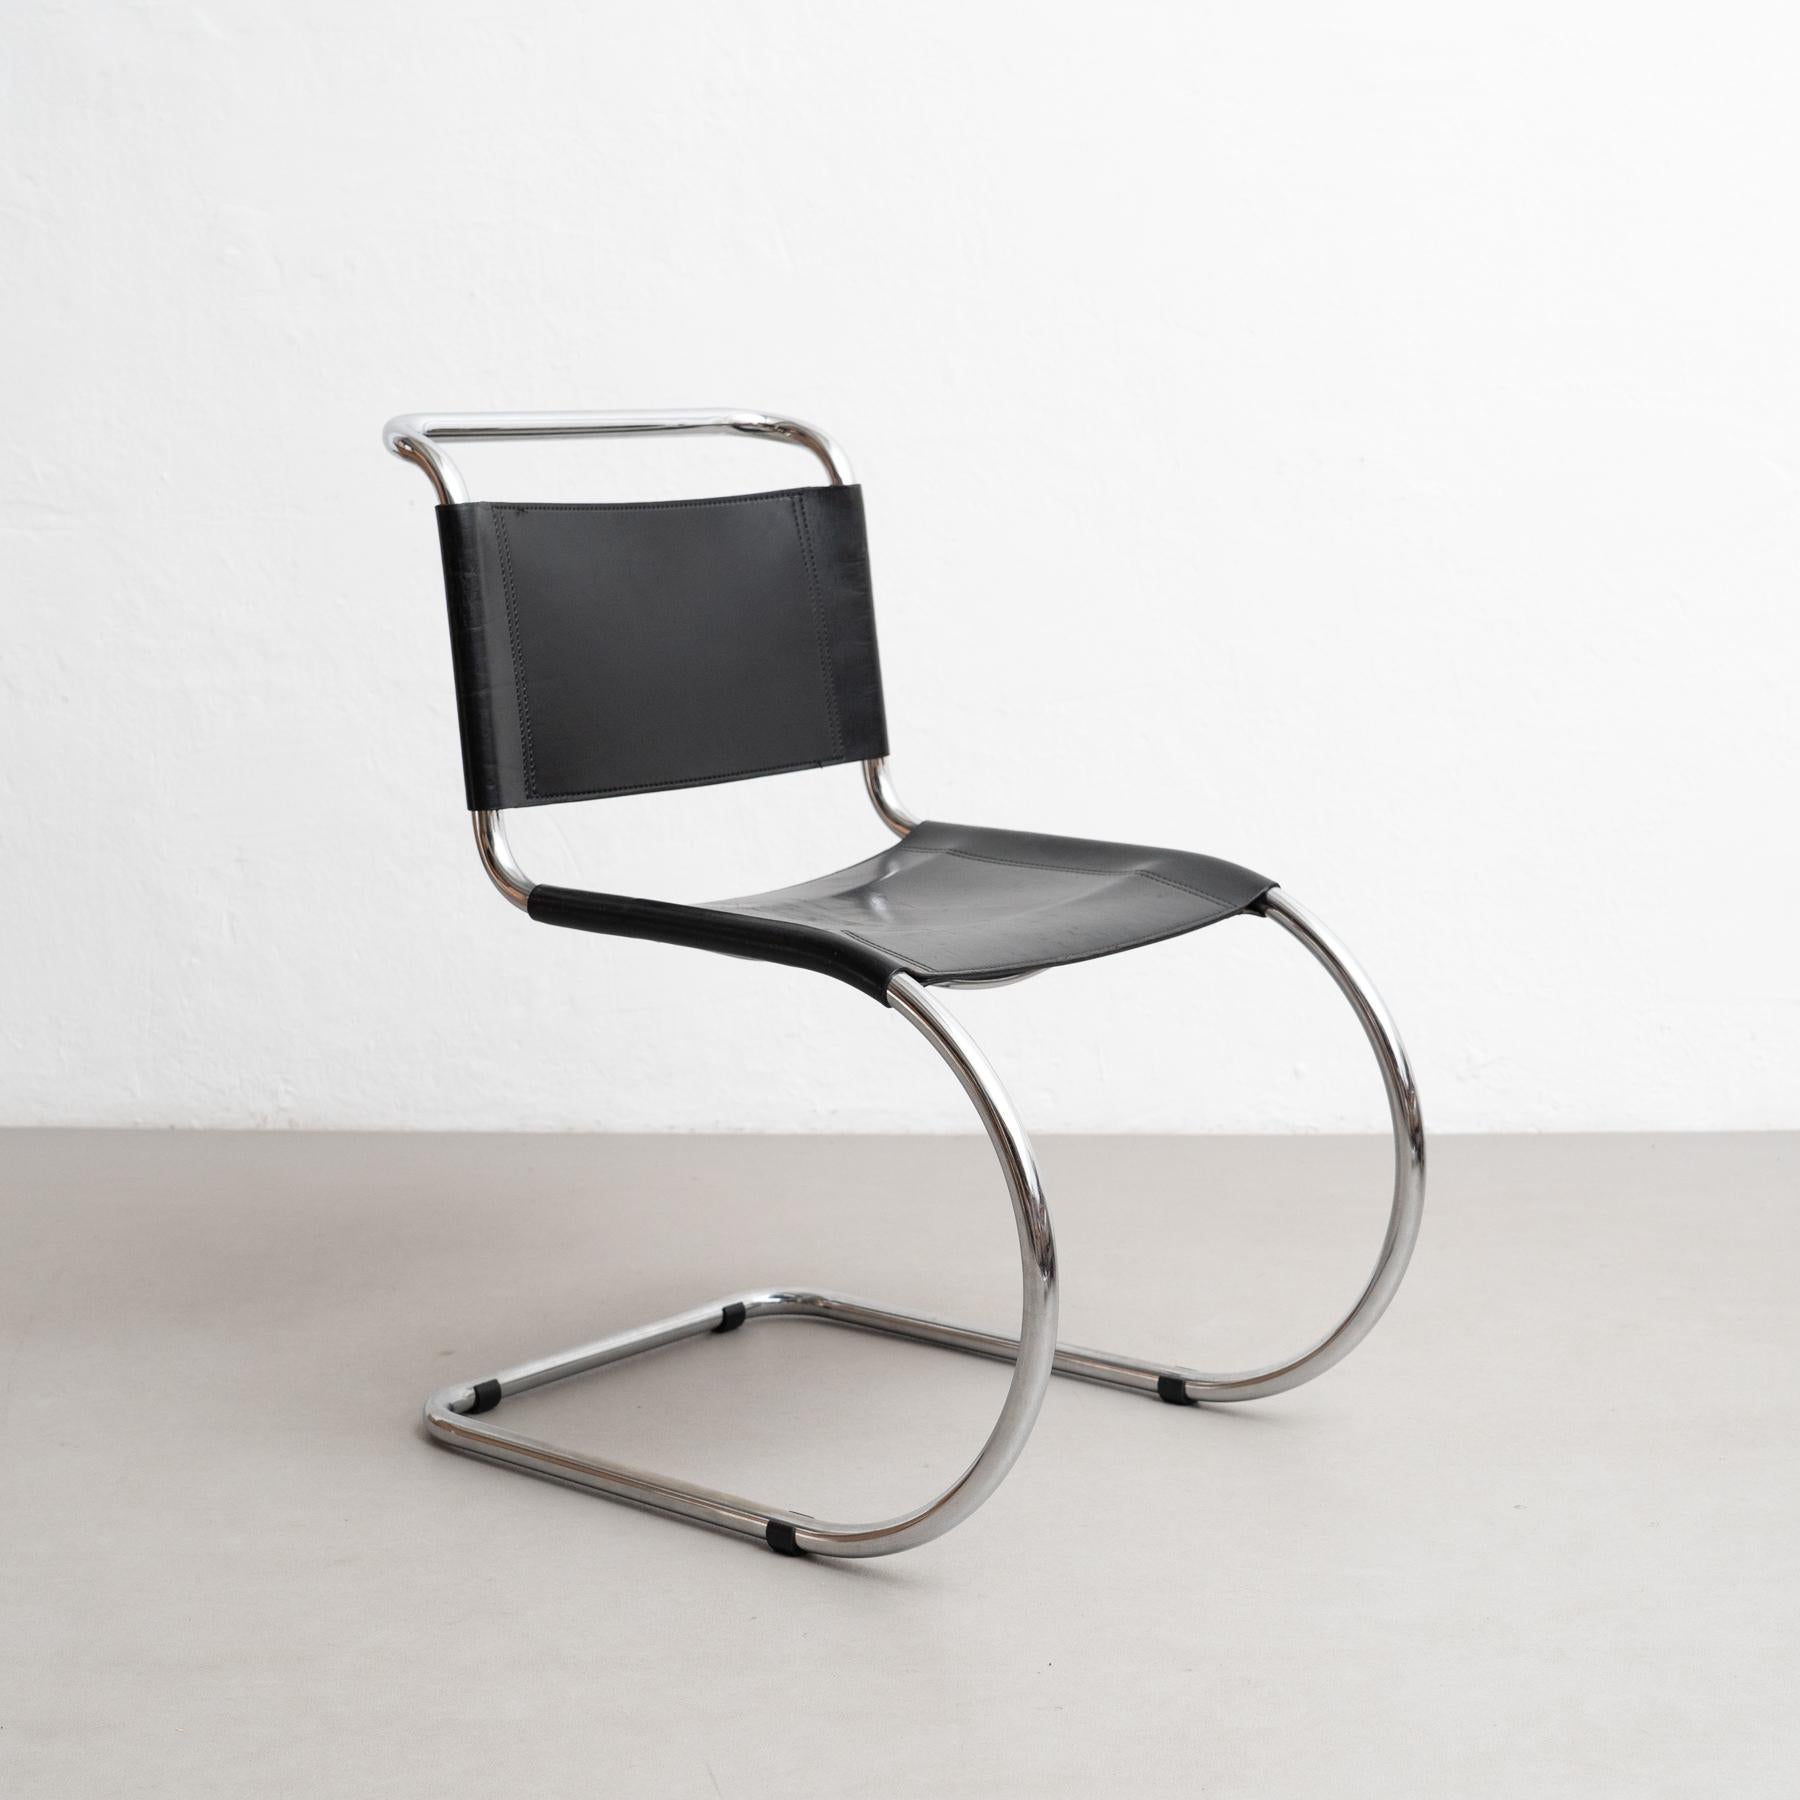 Embrace the refined simplicity of modern architecture with this stunning MR10 cantilever chair, designed by the renowned Ludwig Mies van der Rohe circa 1930 and crafted by an unknown manufacturer in Germany around 1960. Inspired by Marcel Breuer's